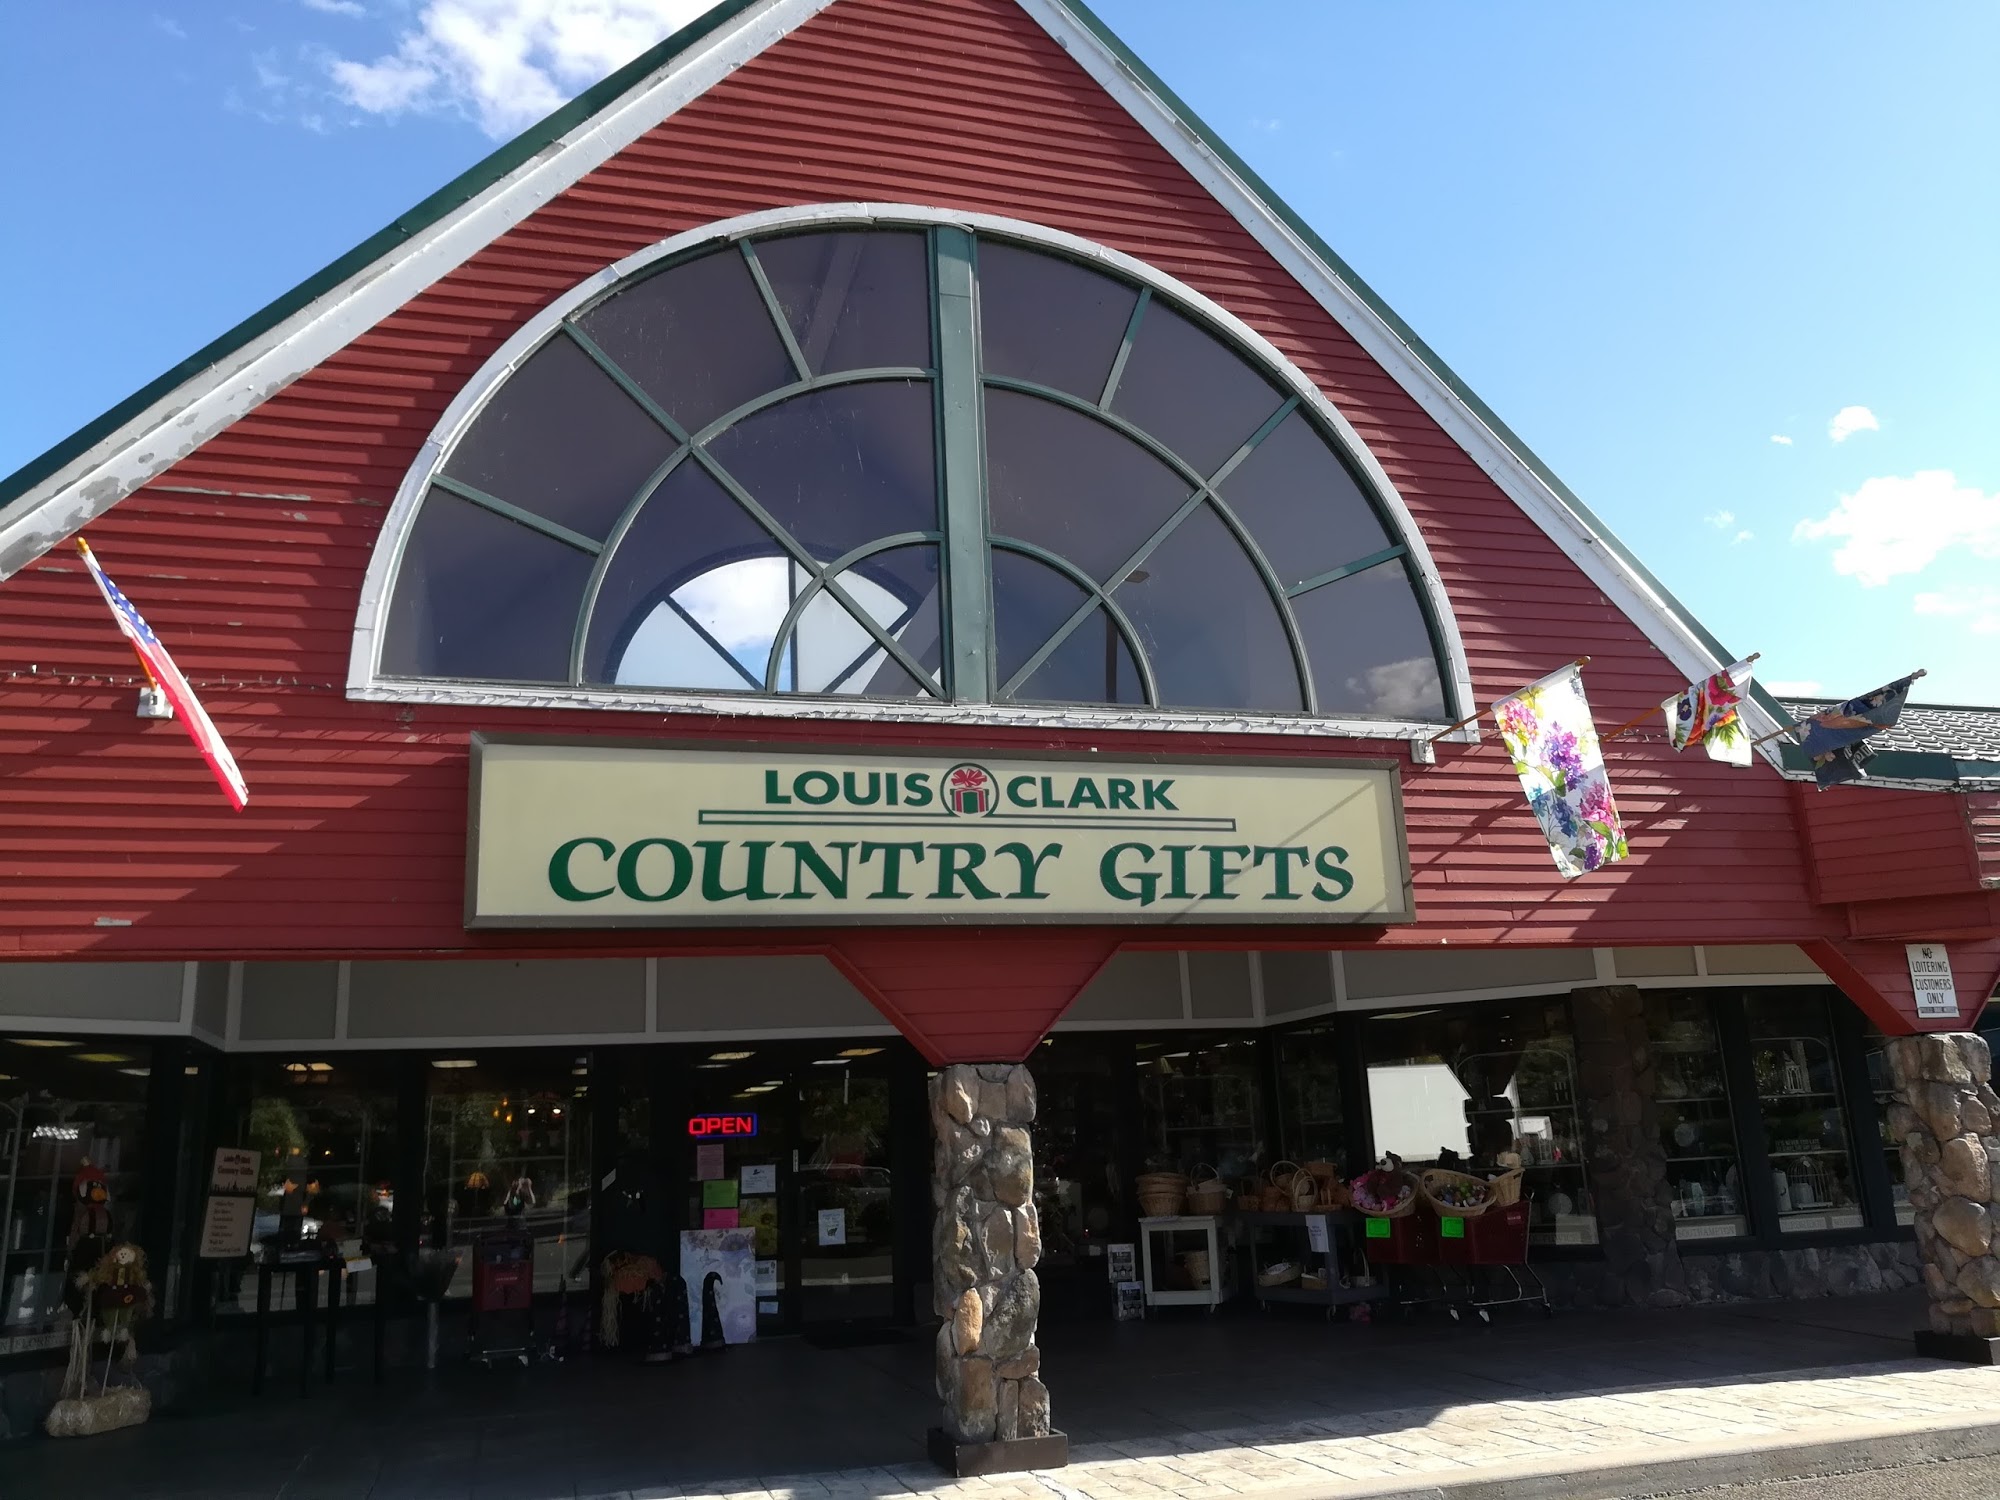 Louis & Clark Country Gifts